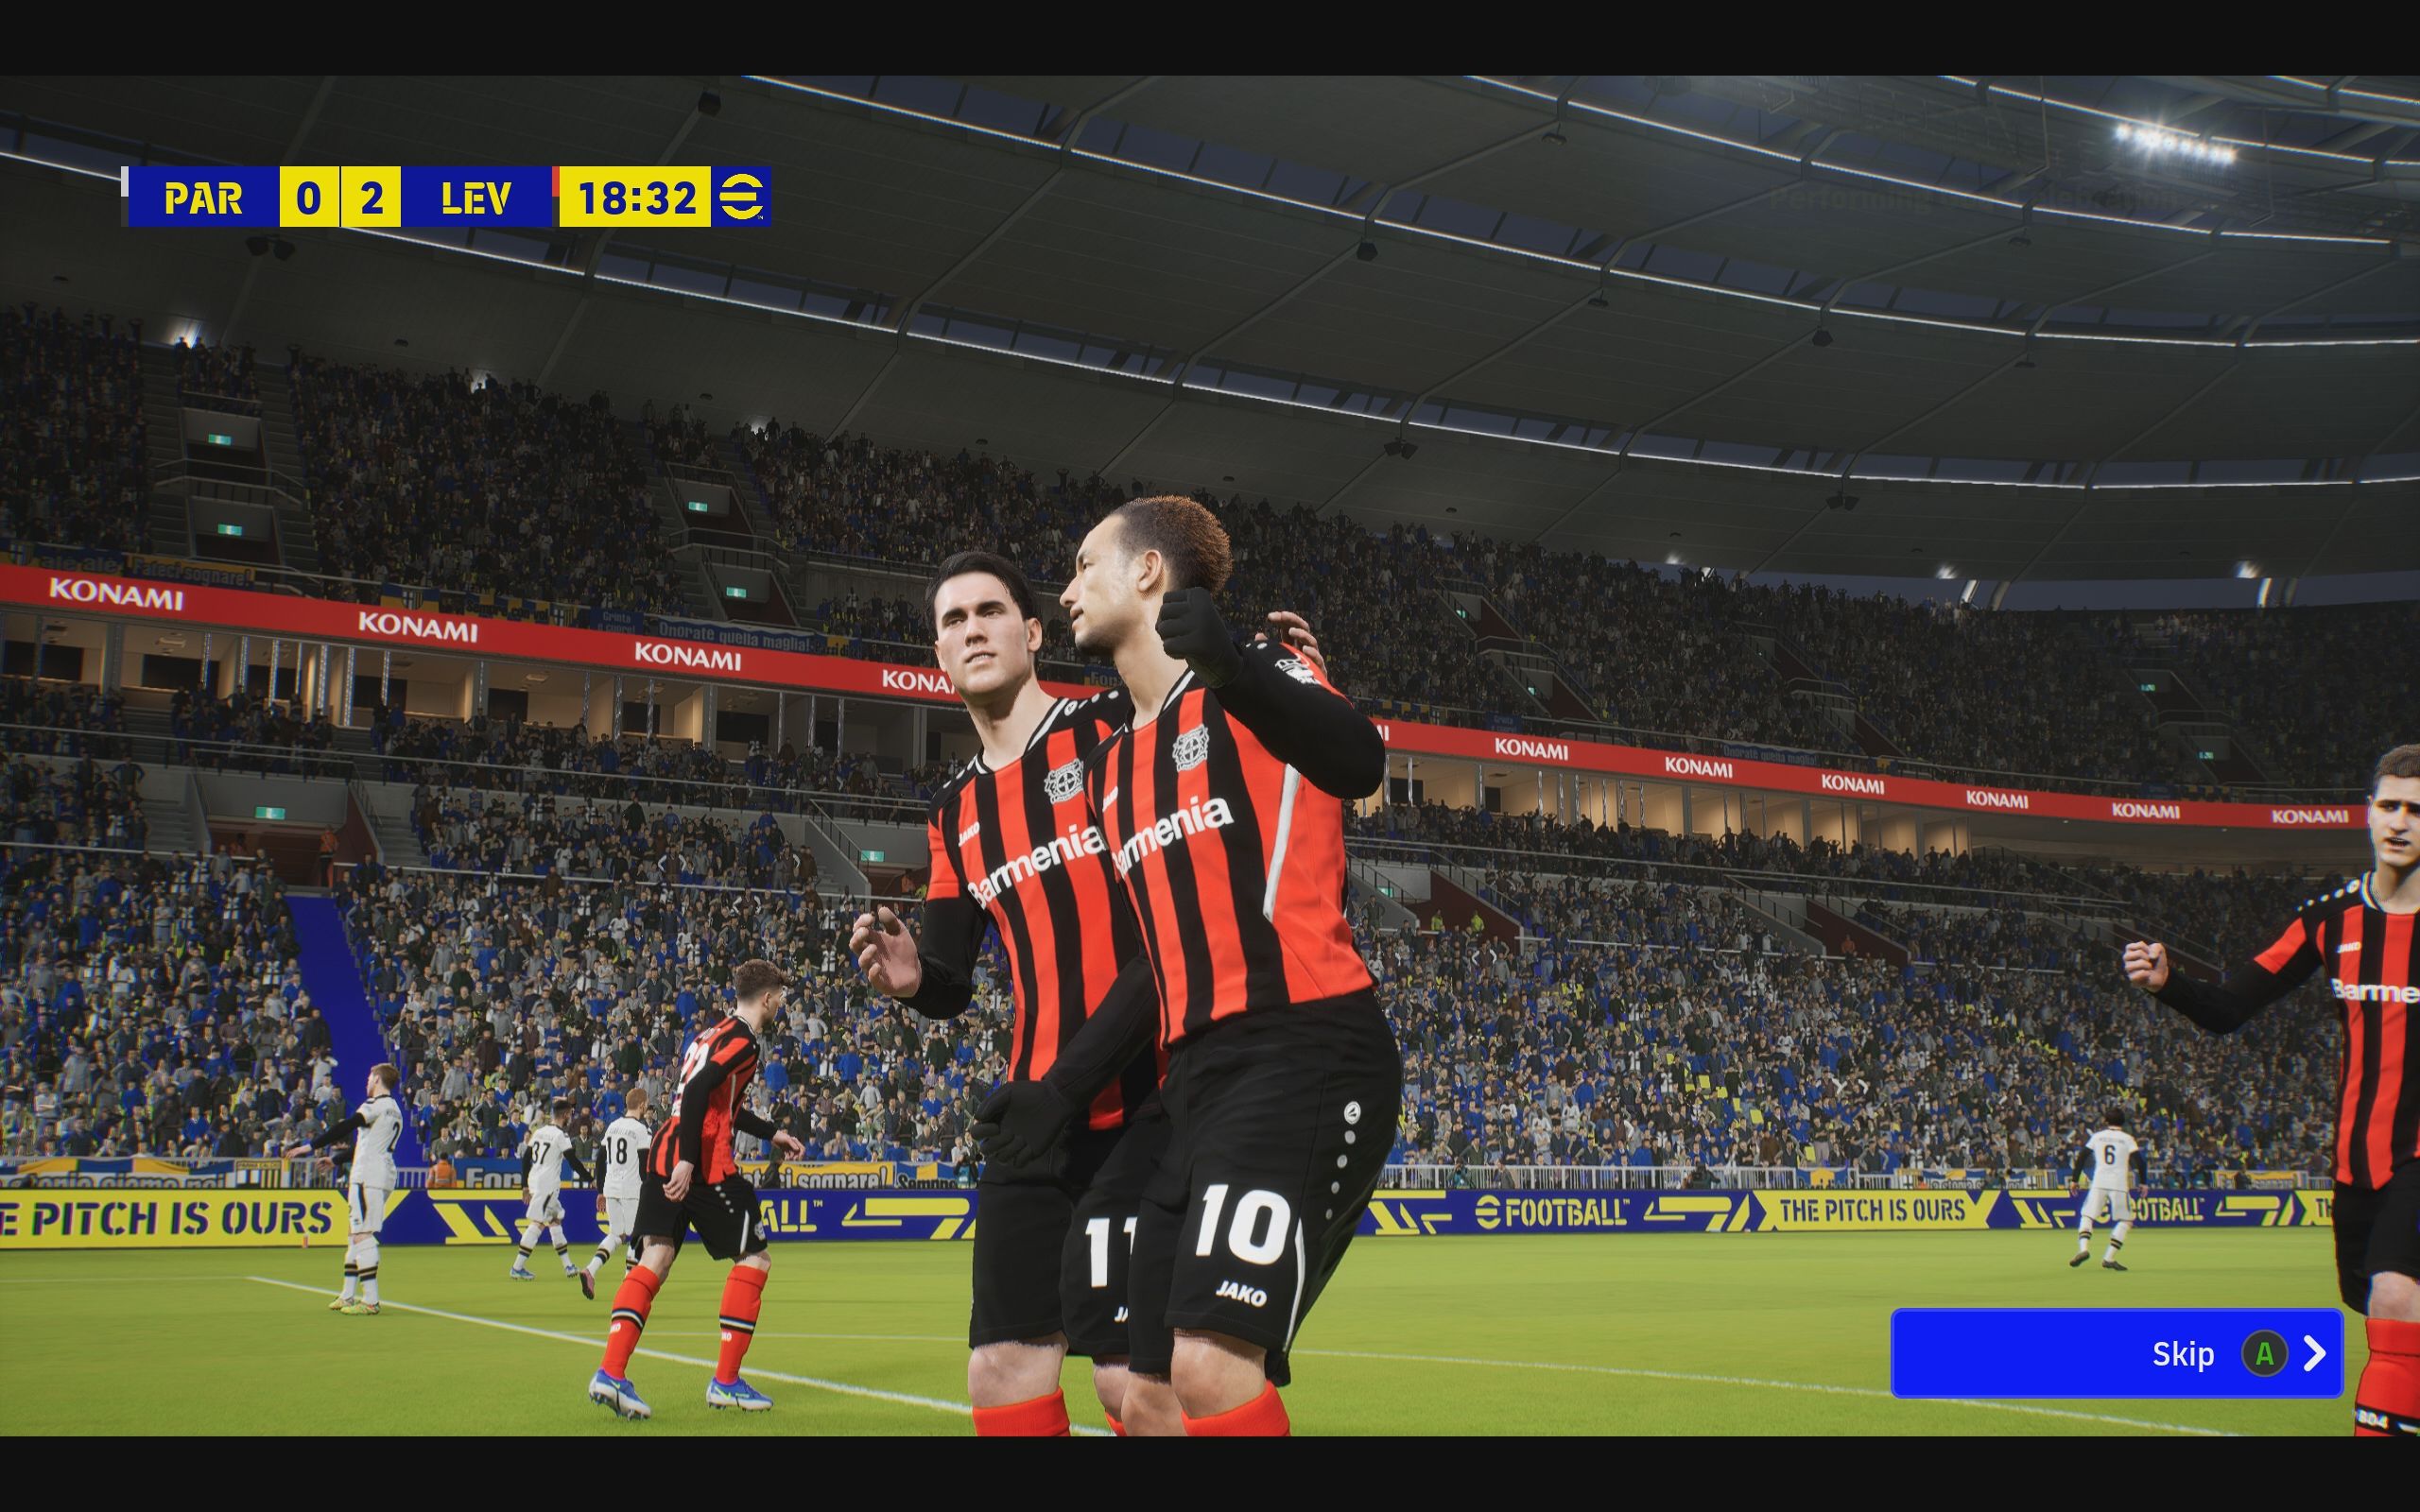 eFootball review: Two players in red and black vertical striped kits celebrate a goal.